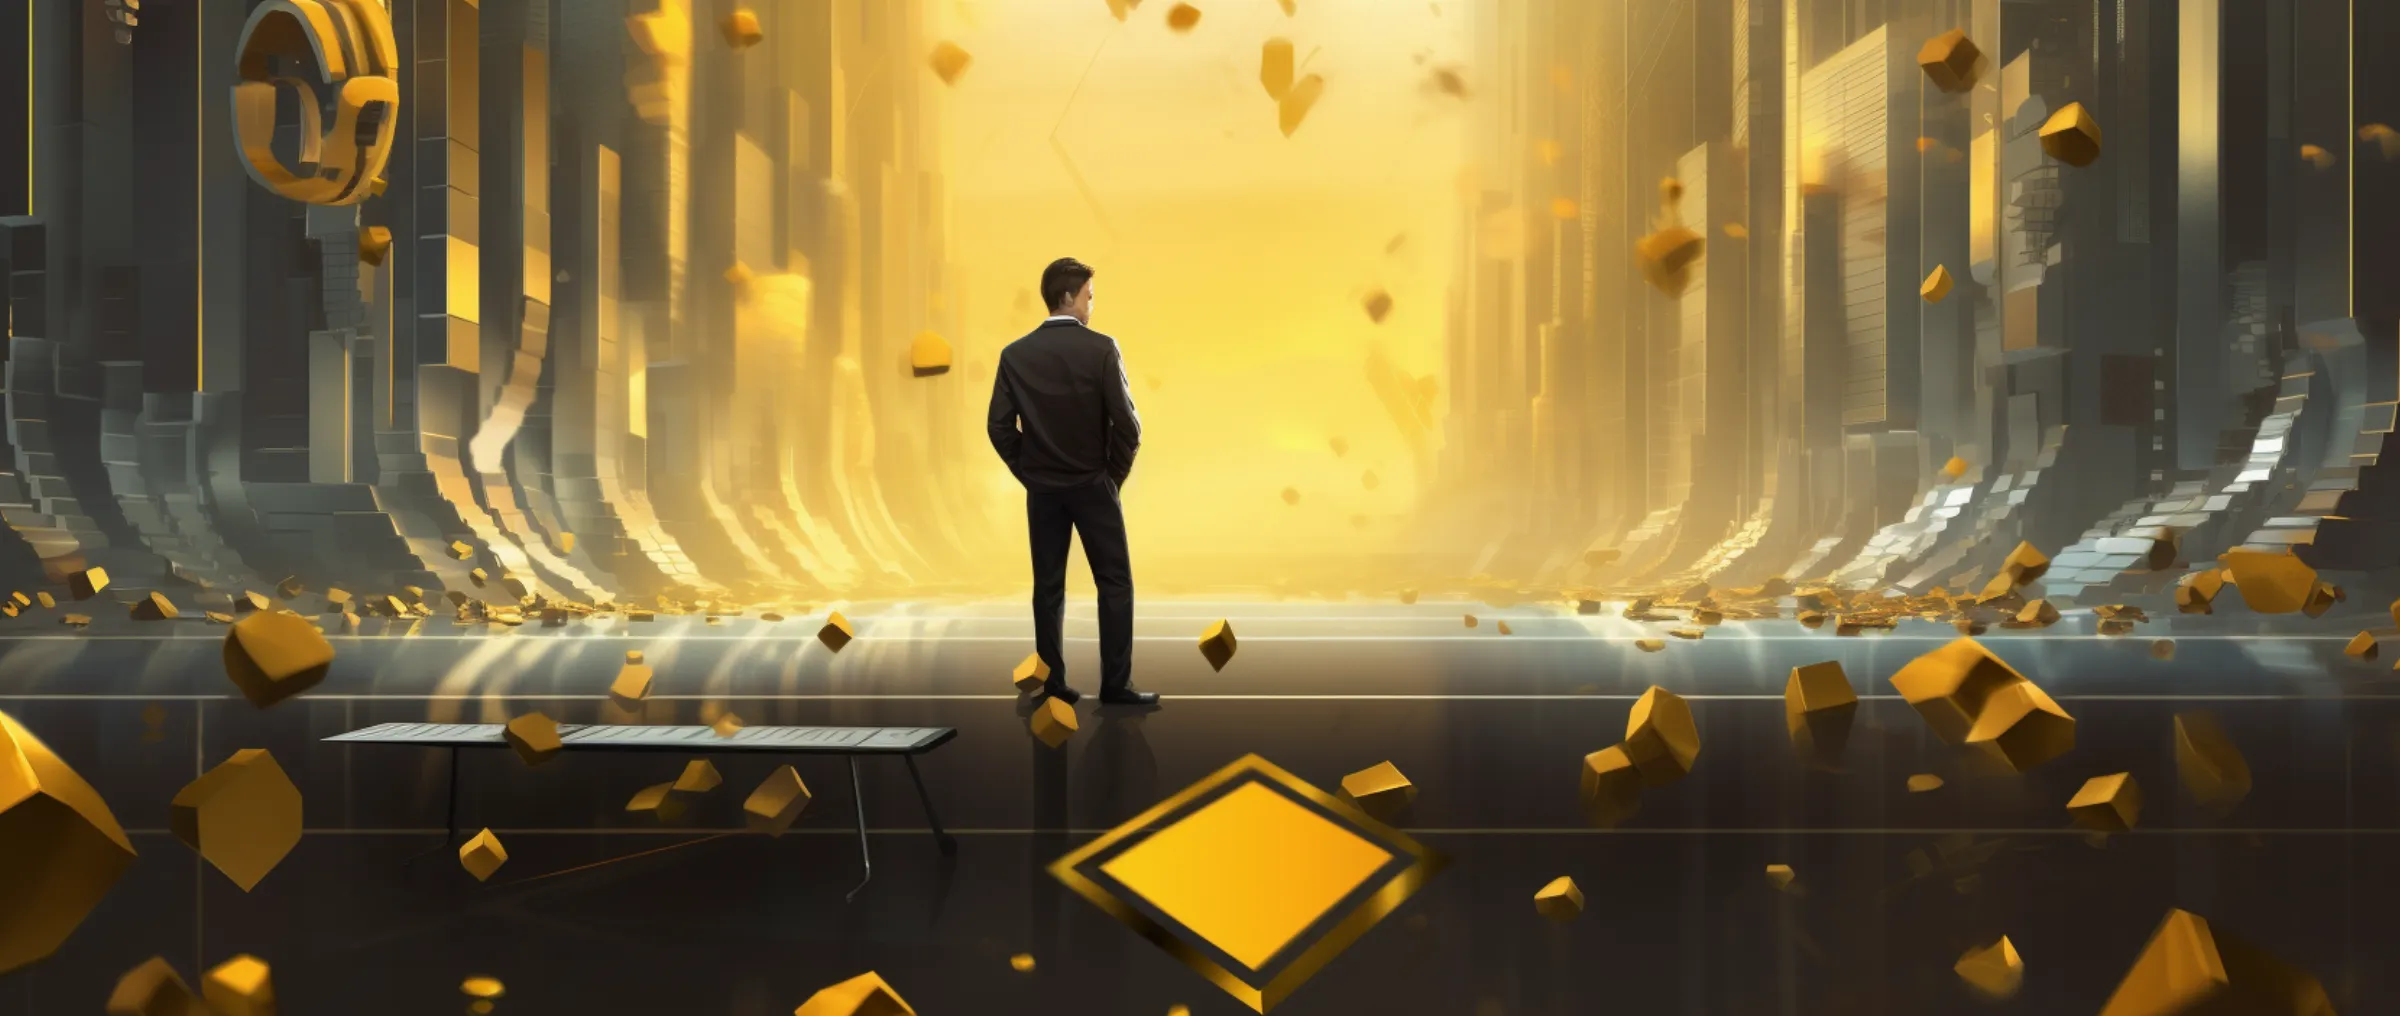 Richard Teng evades the question about the location of Binance headquarters